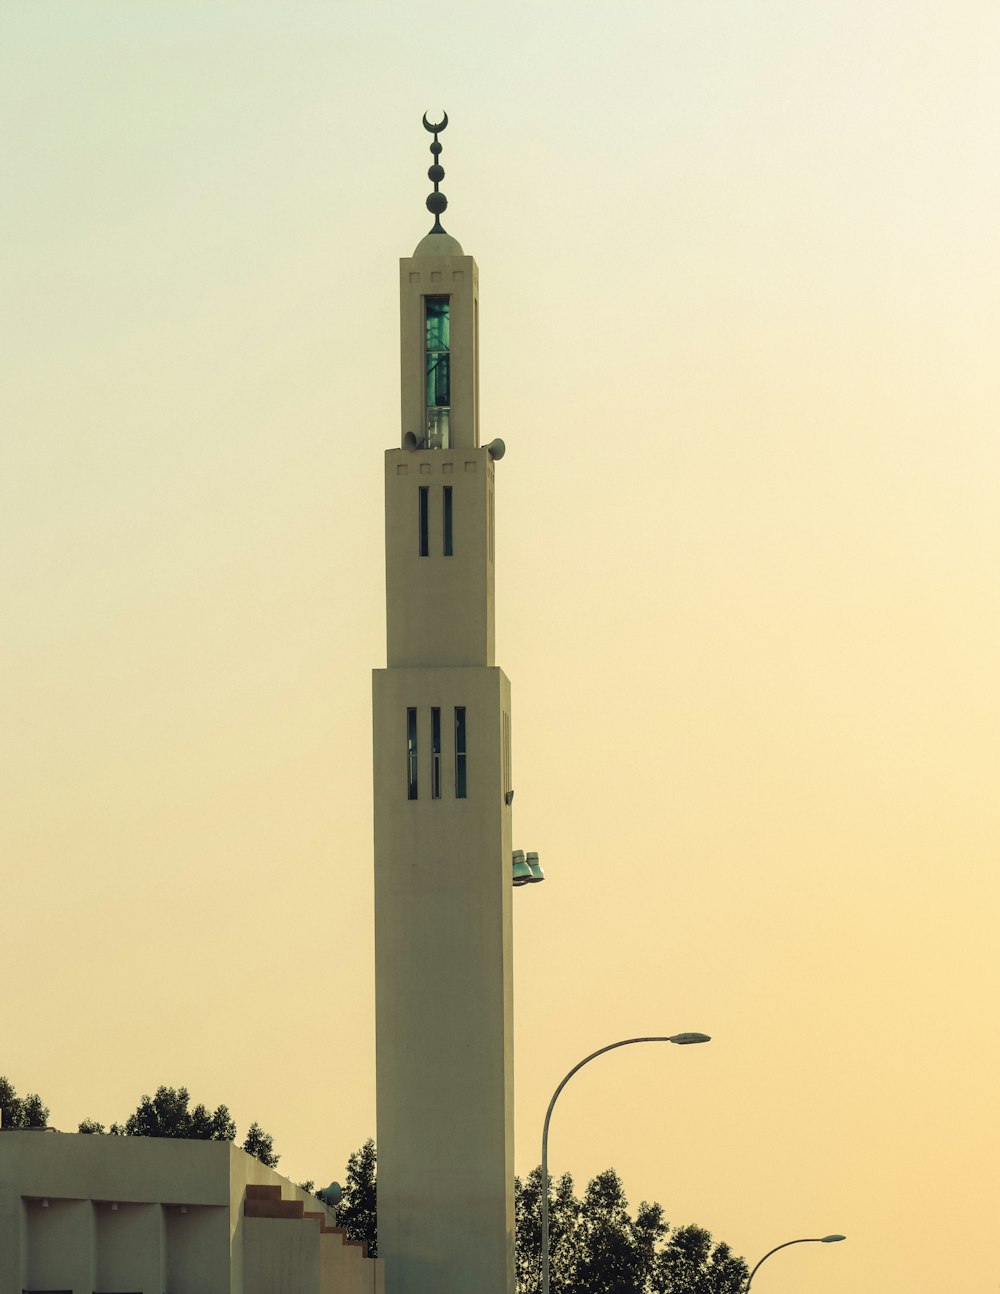 a tall white tower with a clock on top